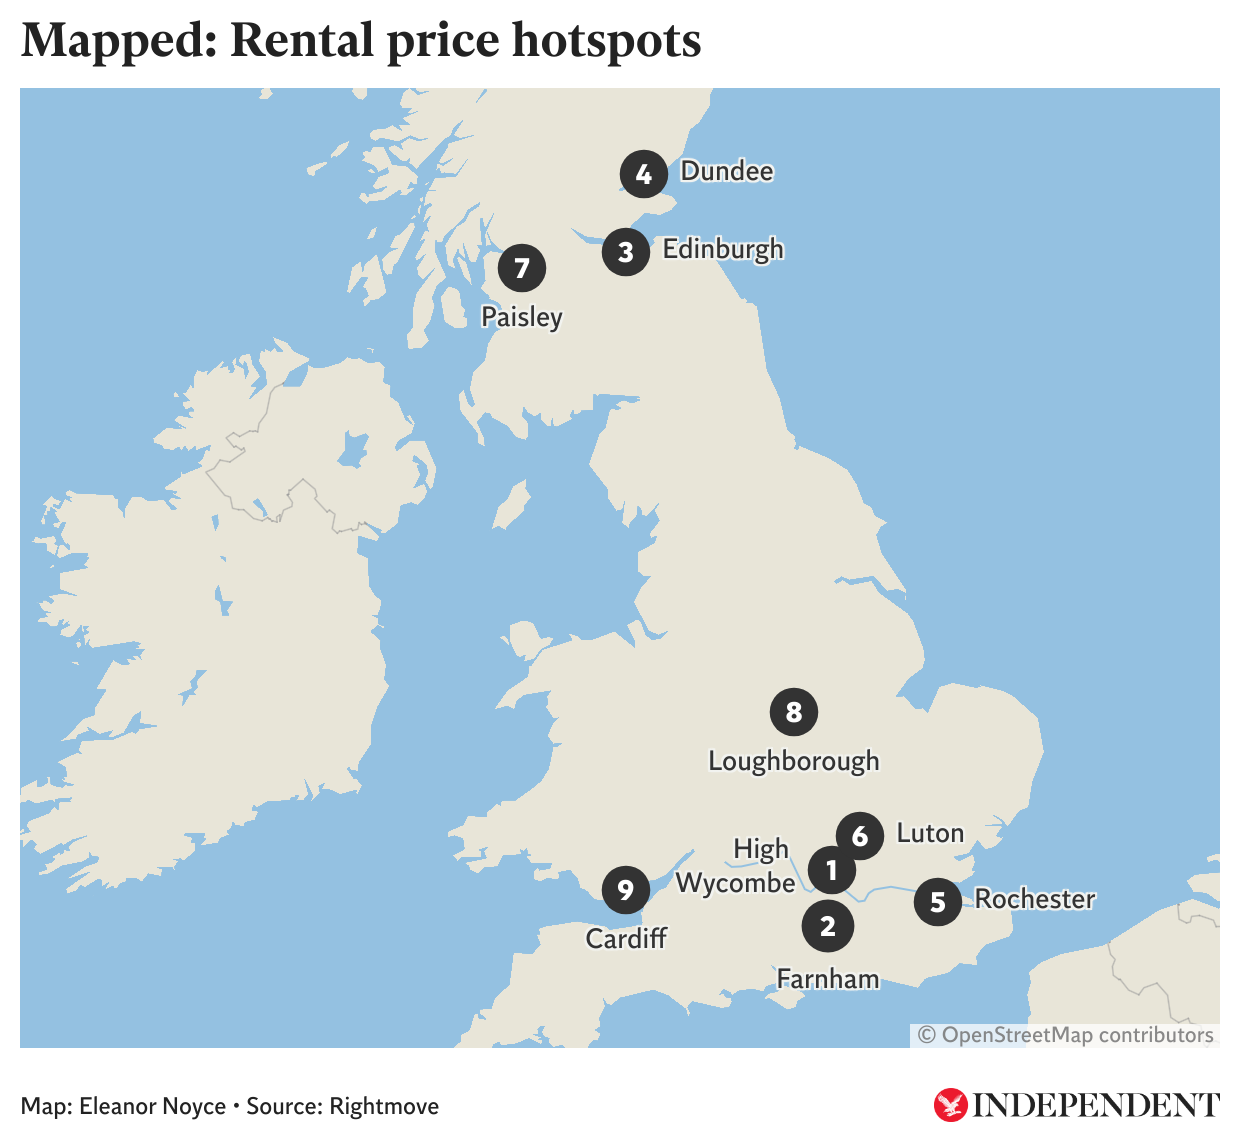 Mapped: Rental price hotspots with the largest annual increases